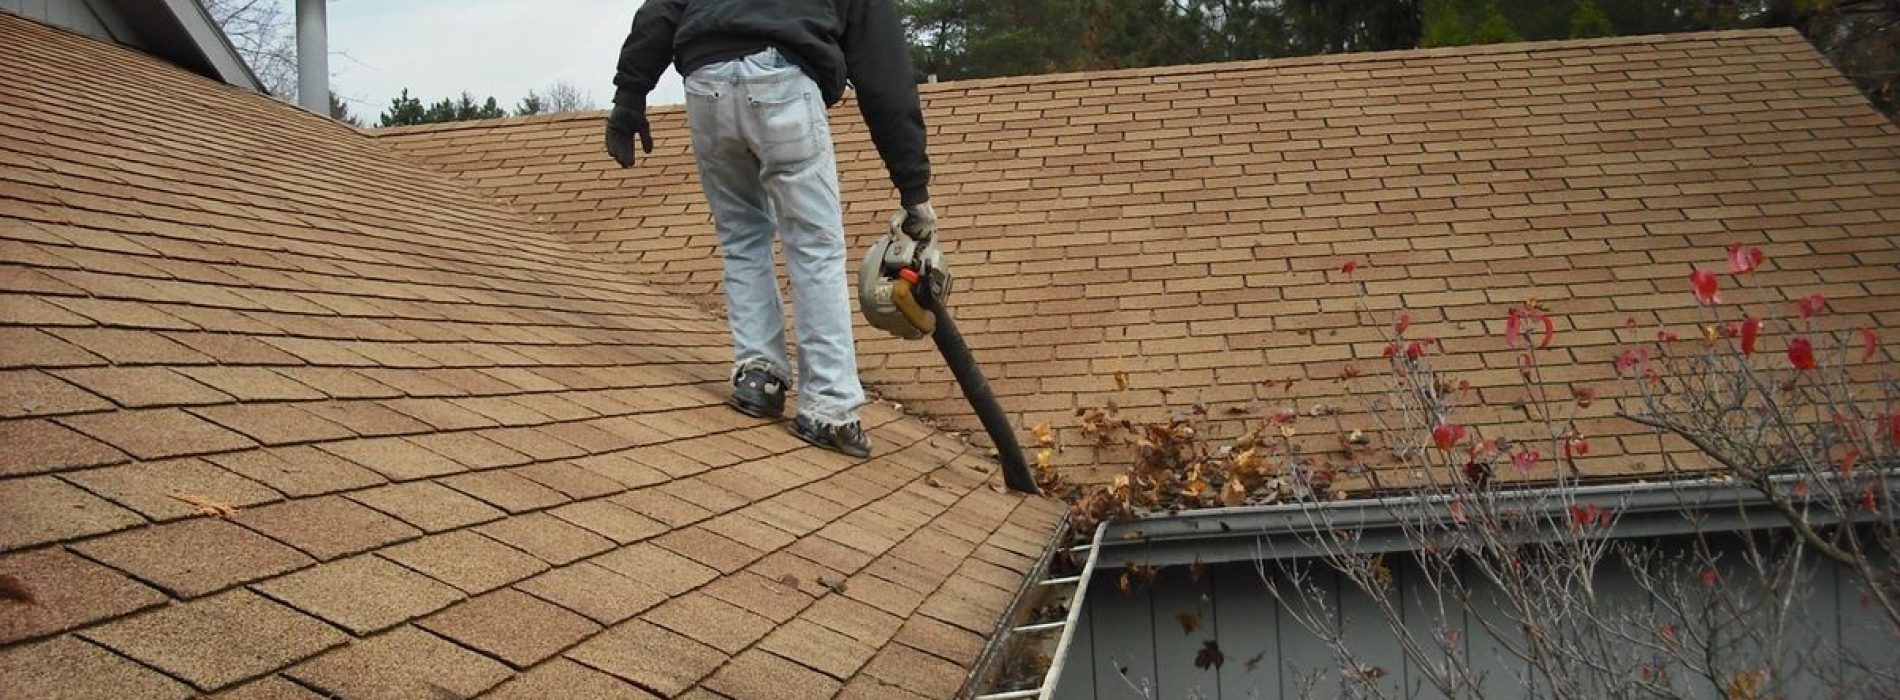 Check rosebab.com for the Things to Keep in Mind When Repairing a Roof﻿